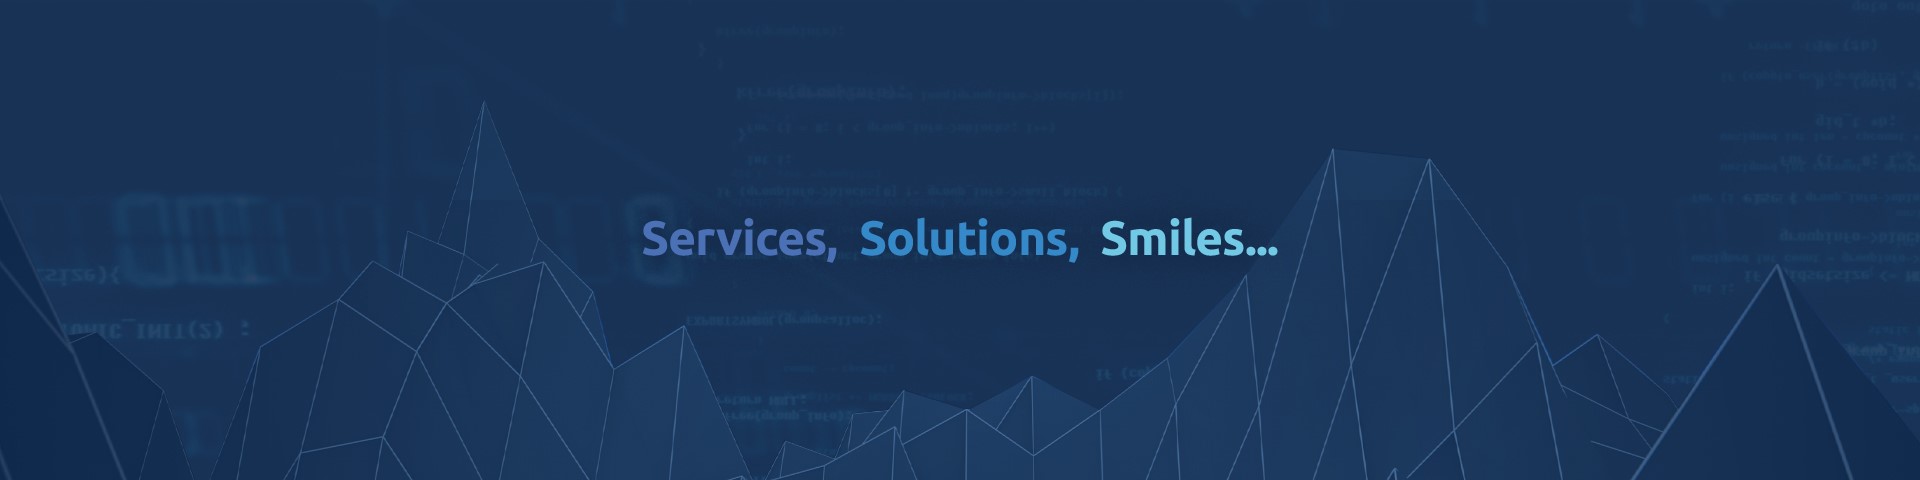 Services Solutions Smiles - Placeholder Banner